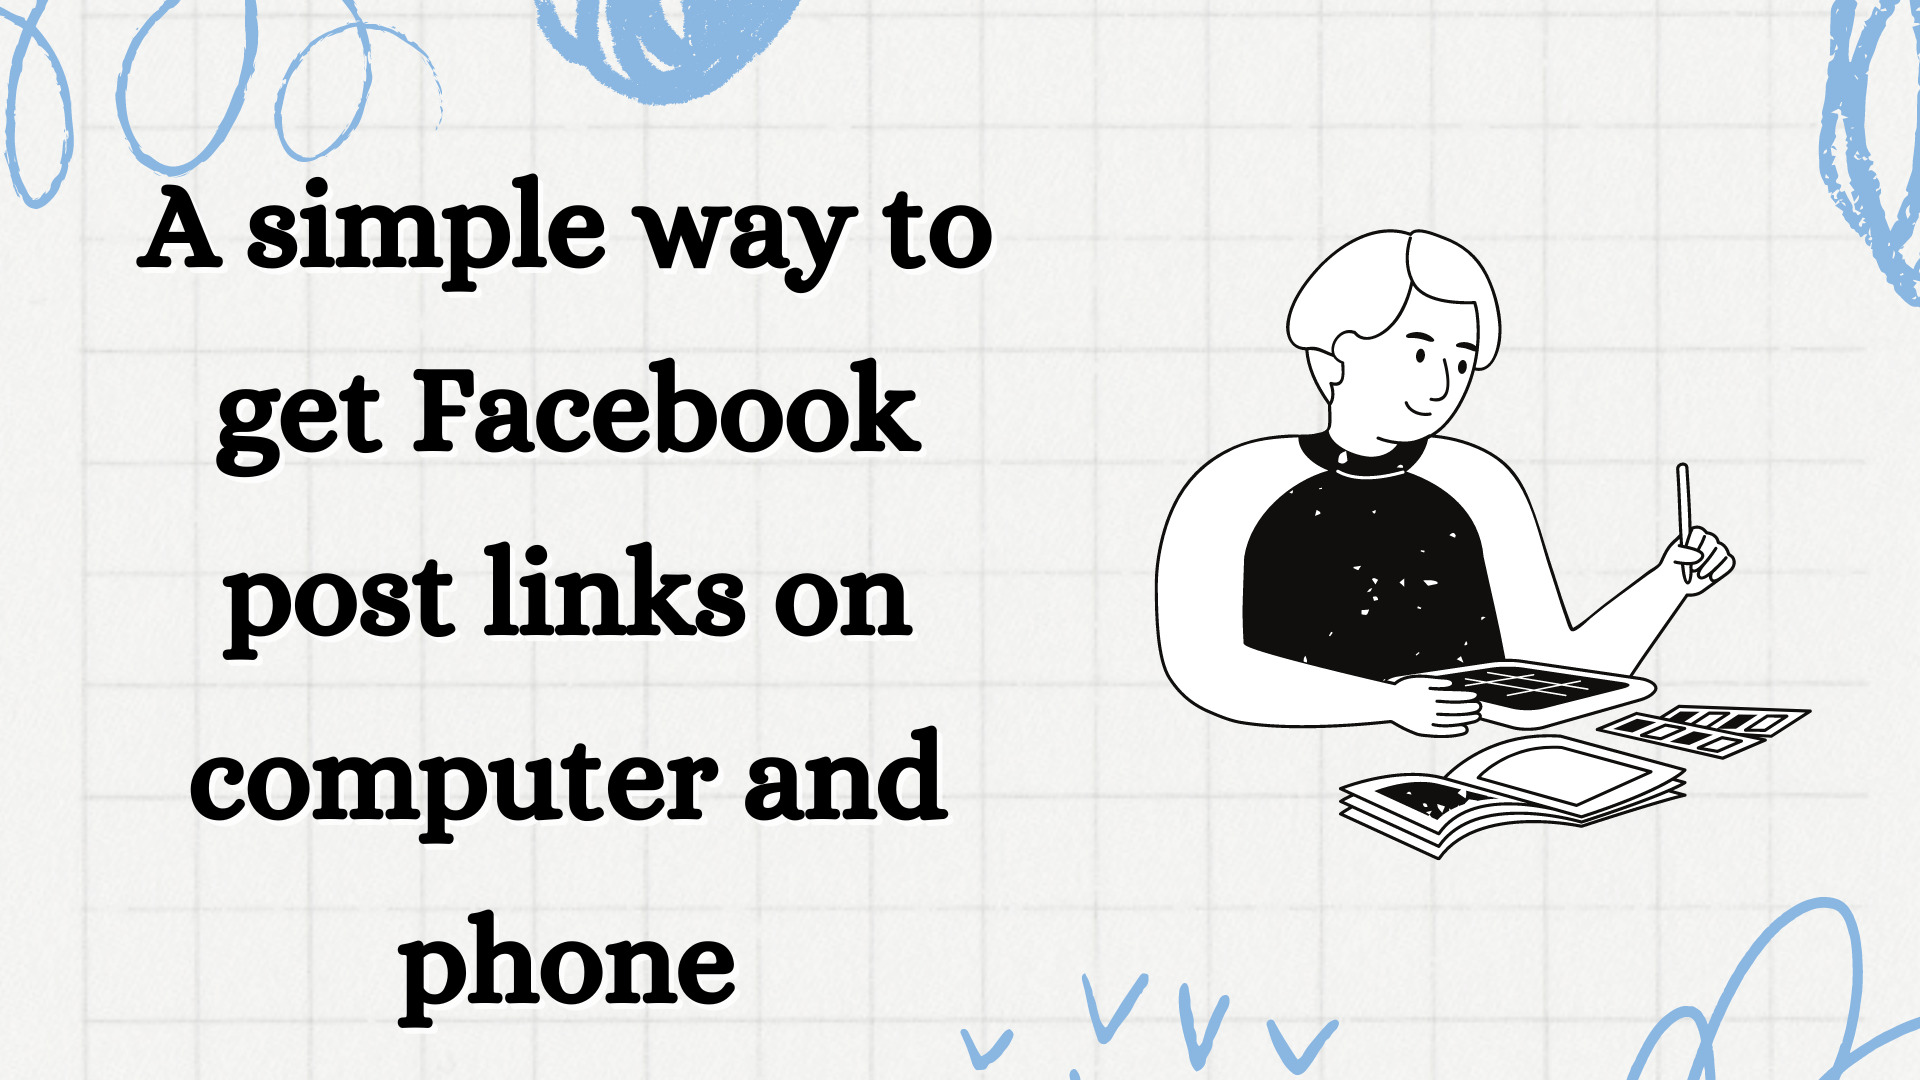 A simple way to get Facebook post links on computer and phone